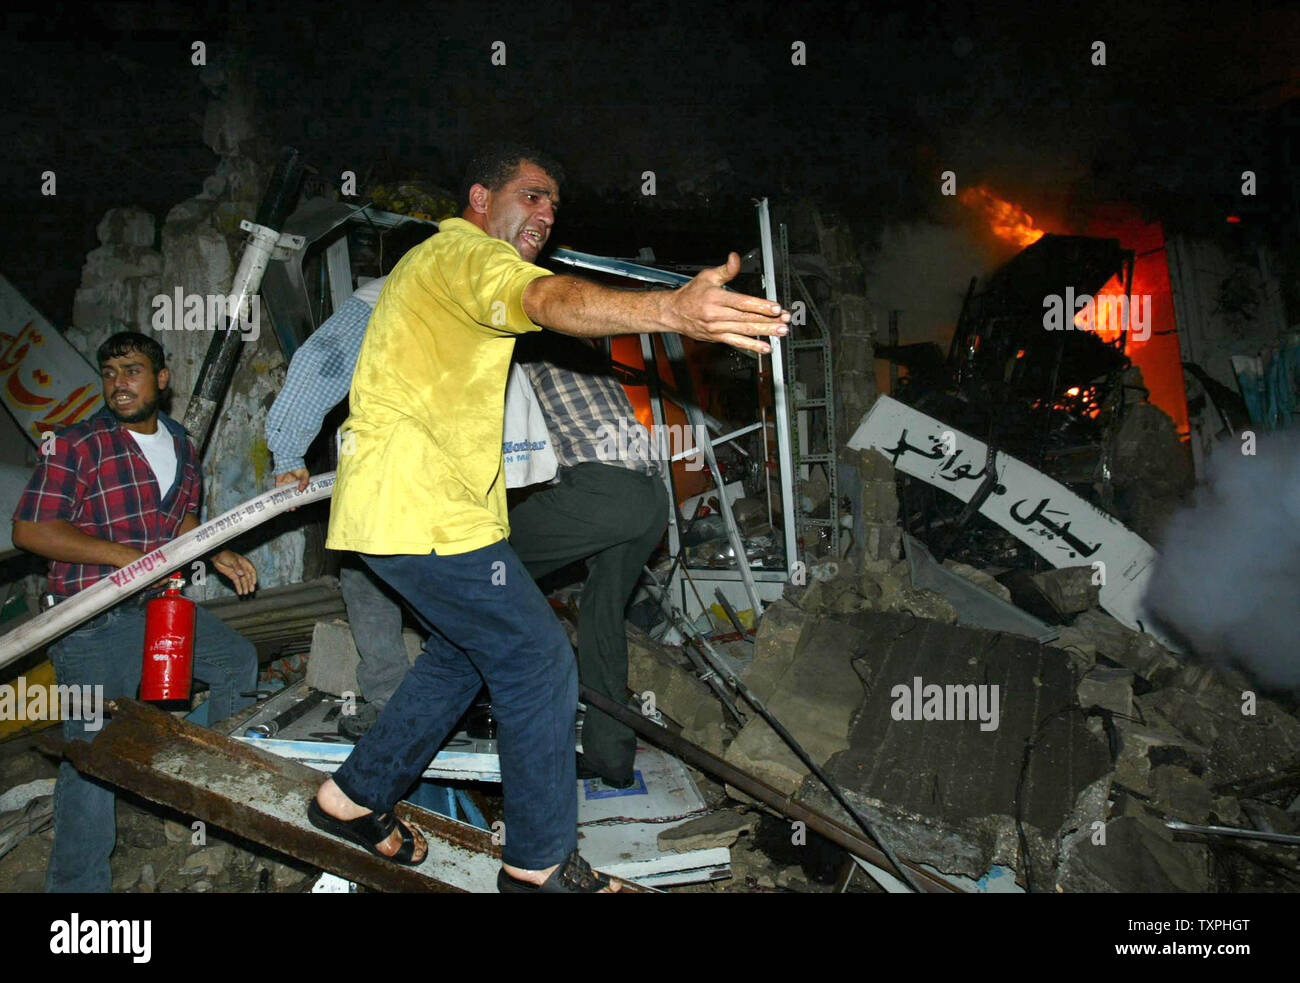 Palestinians help fire rescue workers after an Israeli missile hit a Palestinian car in the al Shejaeiya area of Gaza City on October 2, 2004.  An Israeli airstrike killed Mehdi Mushtaha and Khaled Amreet, both members of Hamas' military wing, as they travelled in a car in Gaza City, sources said. Four bystanders were also wounded in the attack.  (UPI Photo/ STR) Stock Photo